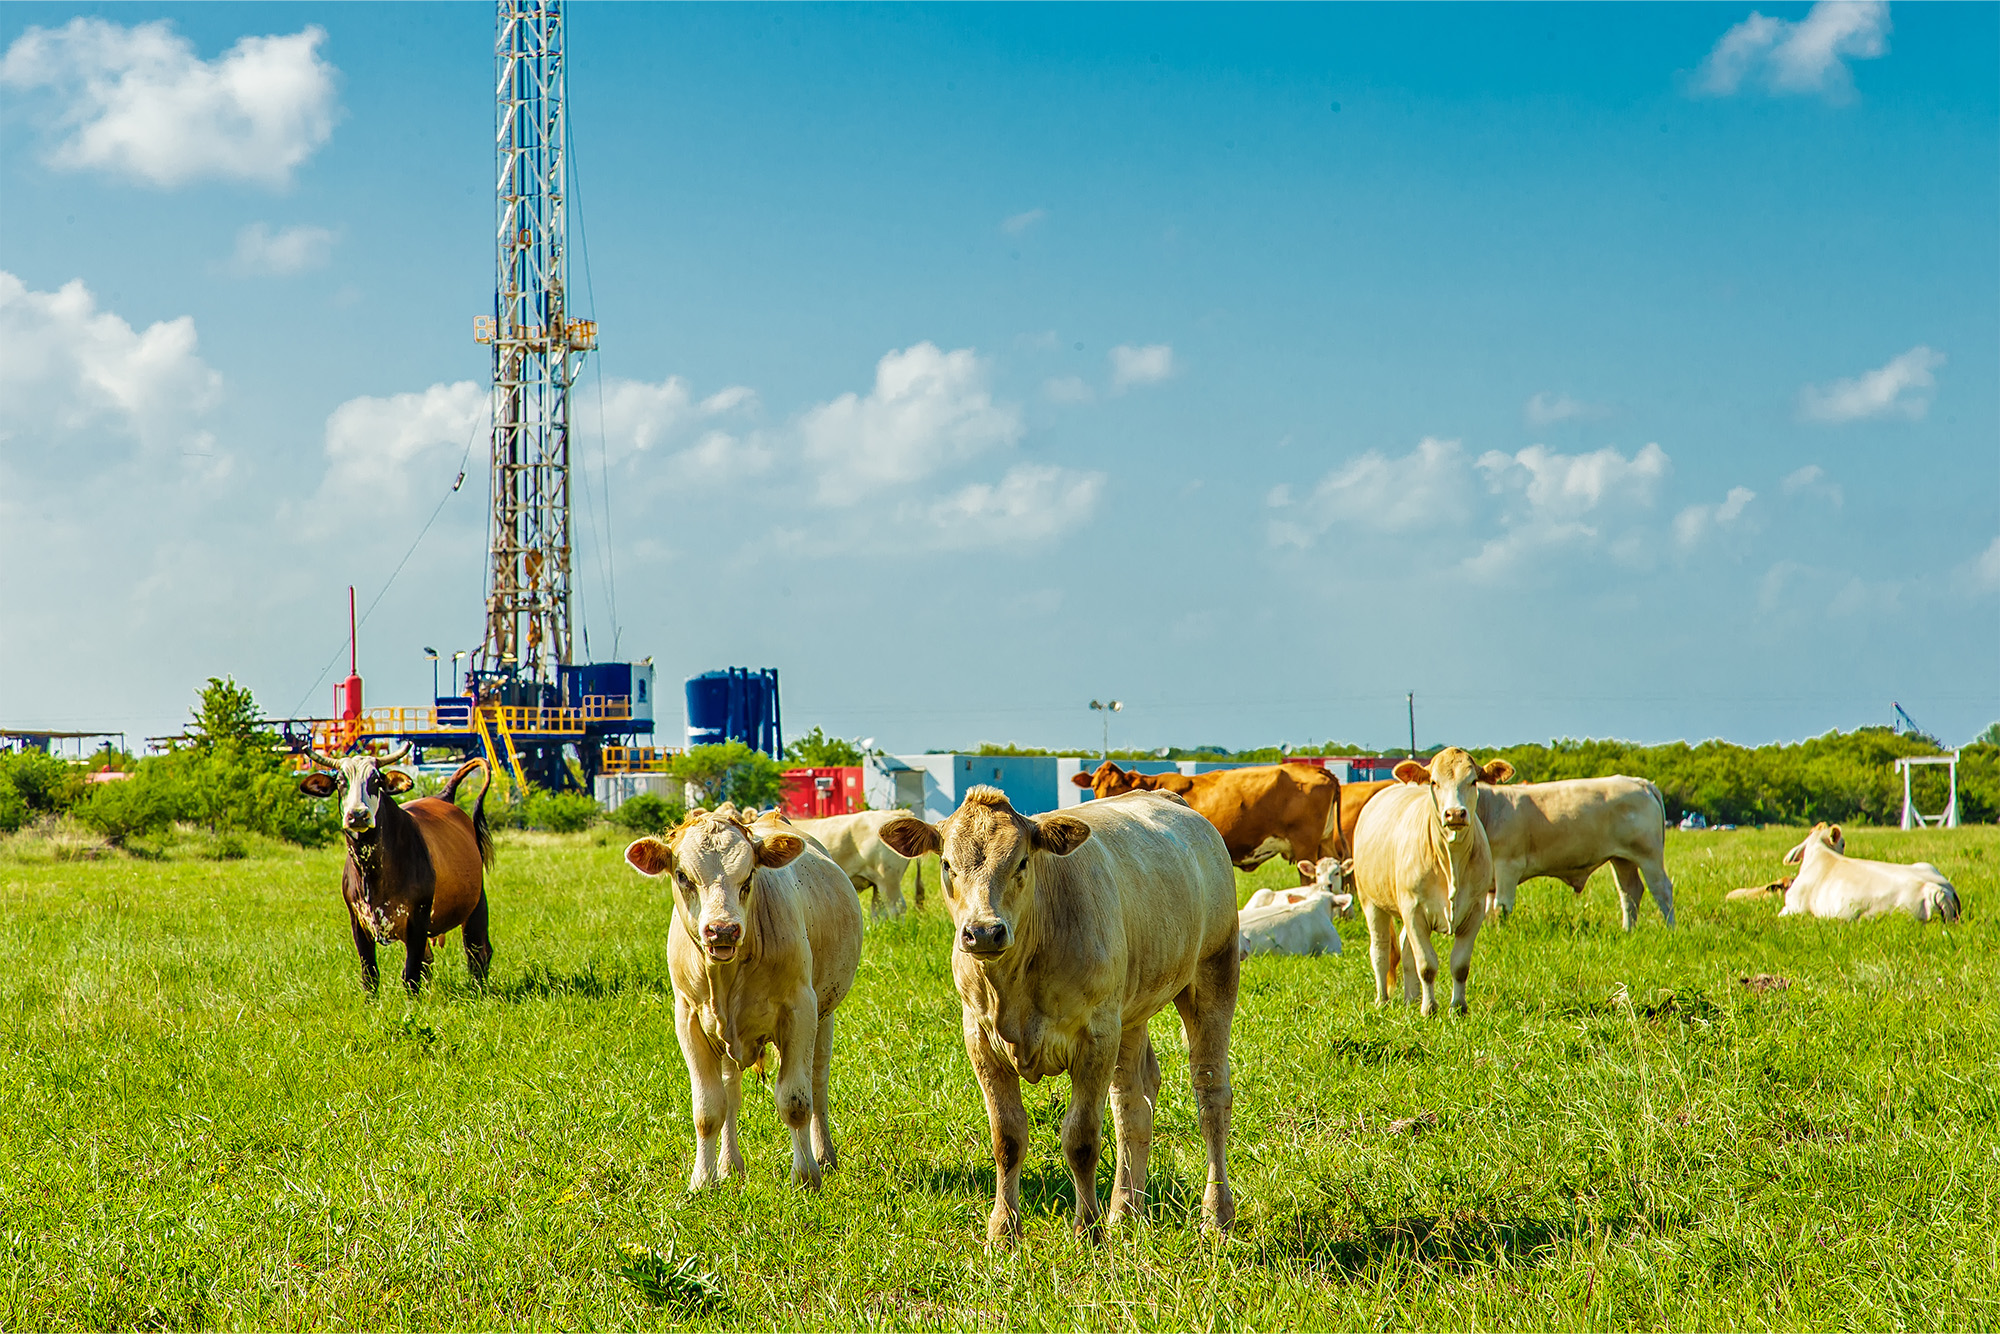 An oil well in the background with a herd of cattle in the foreground.